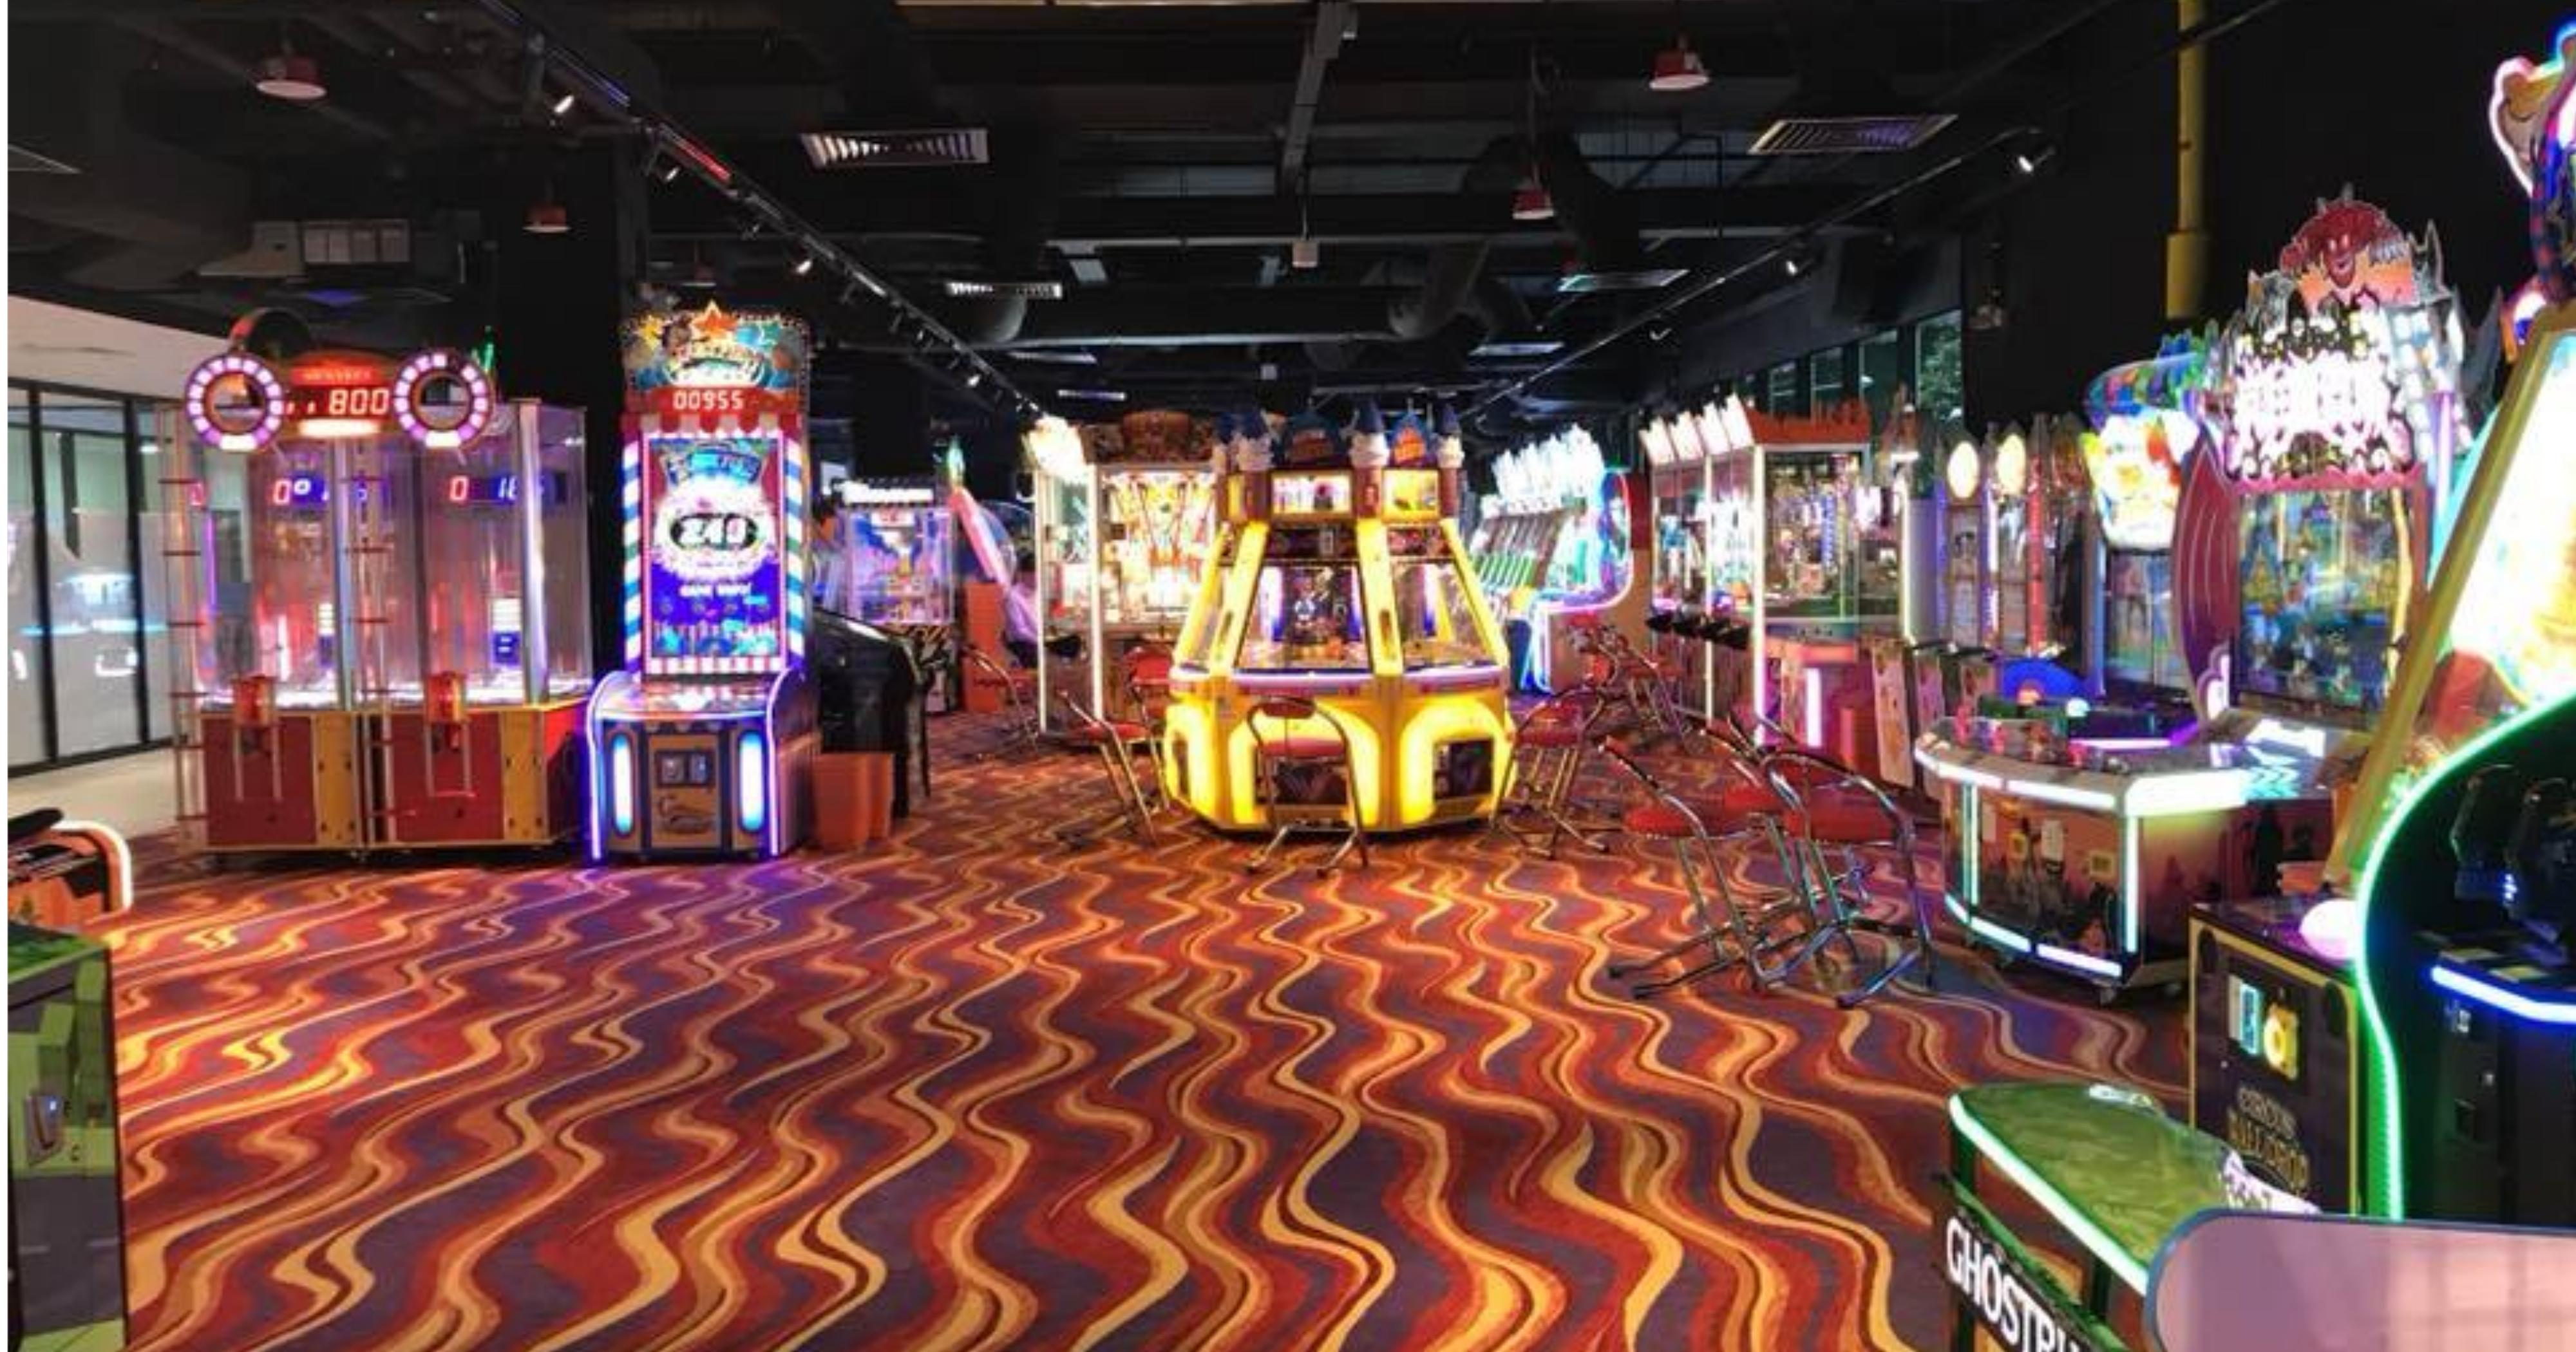 Fat Cat Arcade Opens In Djitsun Mall Bedok Said To Be Largest In East S Pore Mothership Sg News From Singapore Asia And Around The World